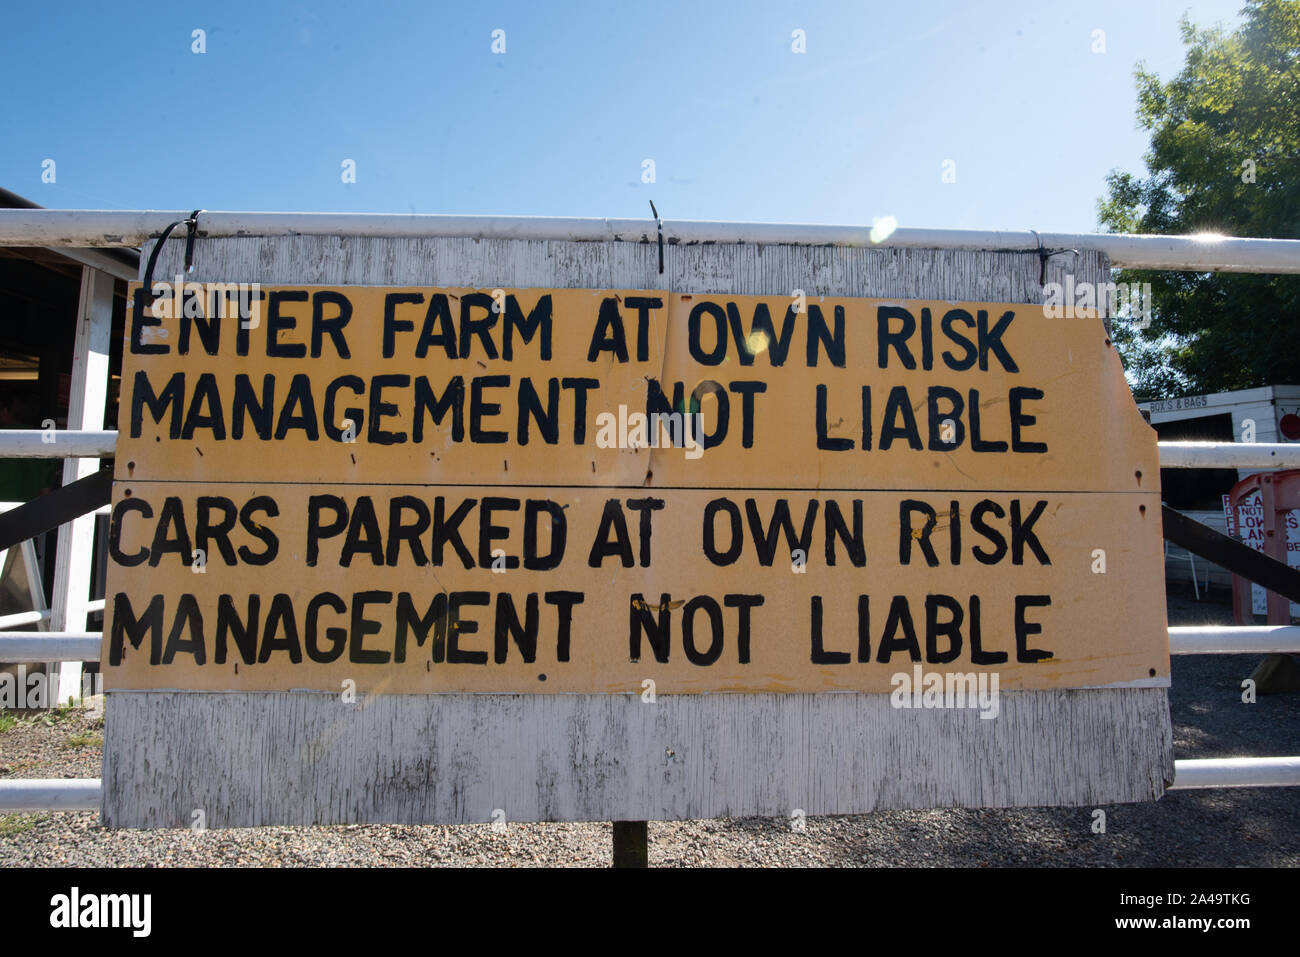 Kent, United Kingdom - September 15, 2019: A hand-painted yellow and black sign says “Enter Farm at Own Risk” and “Management Not Liable”. Stock Photo